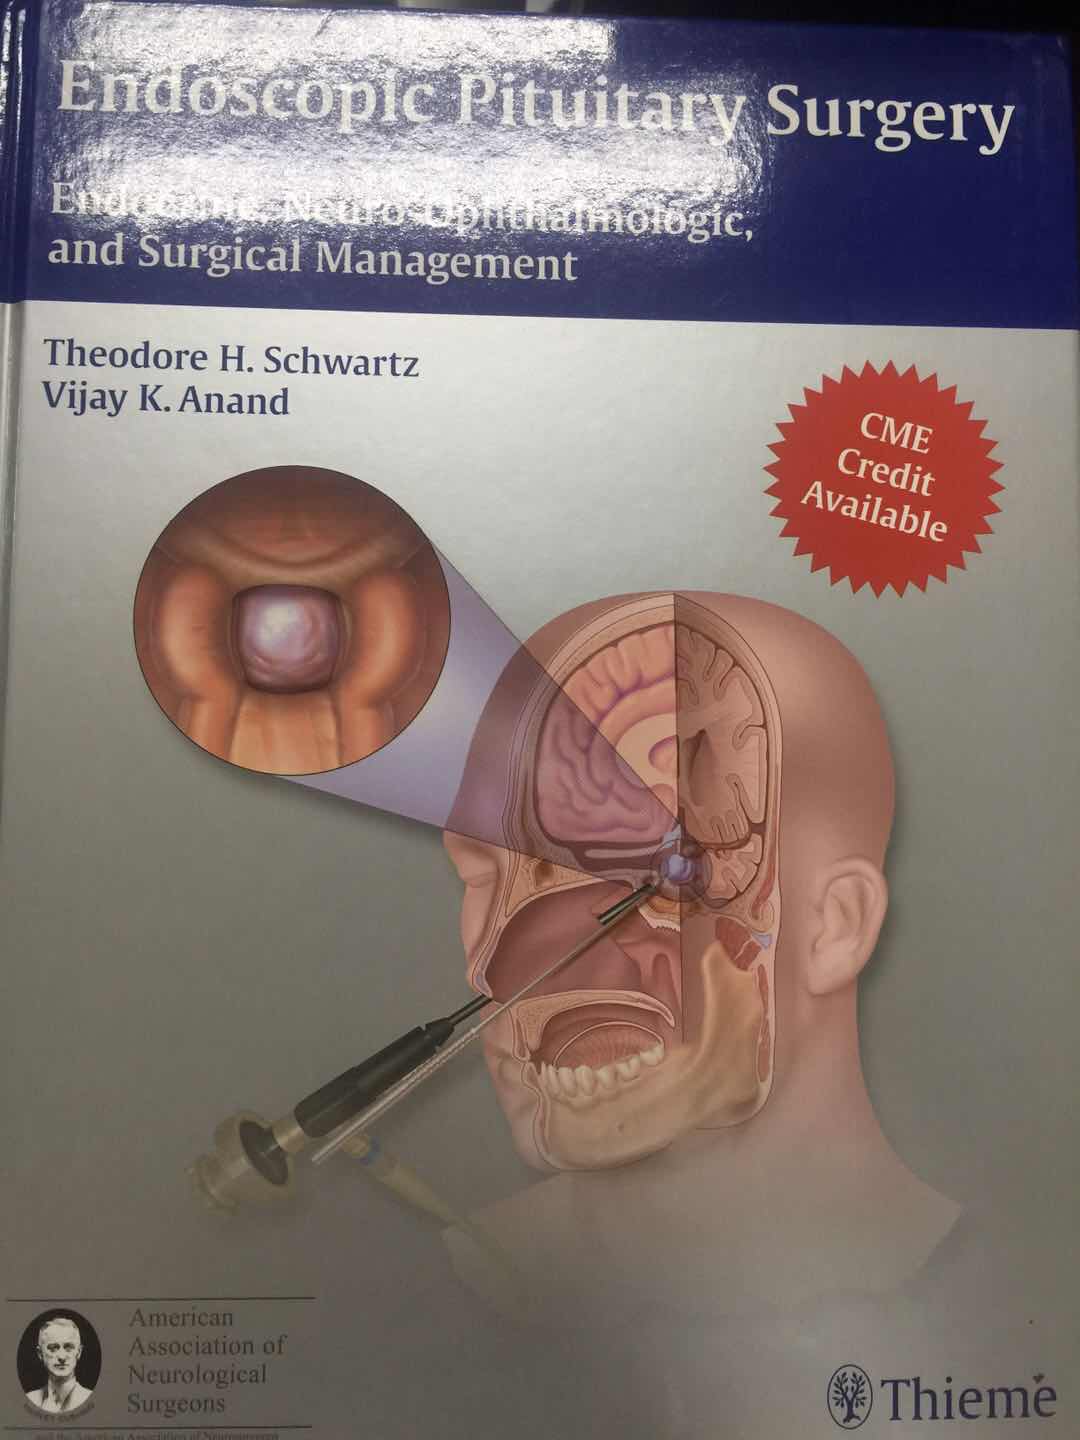 《Endoscopic Pituitary Surgery: Endocrine, Neuro-Ophthalmologic, and Surgical Management》